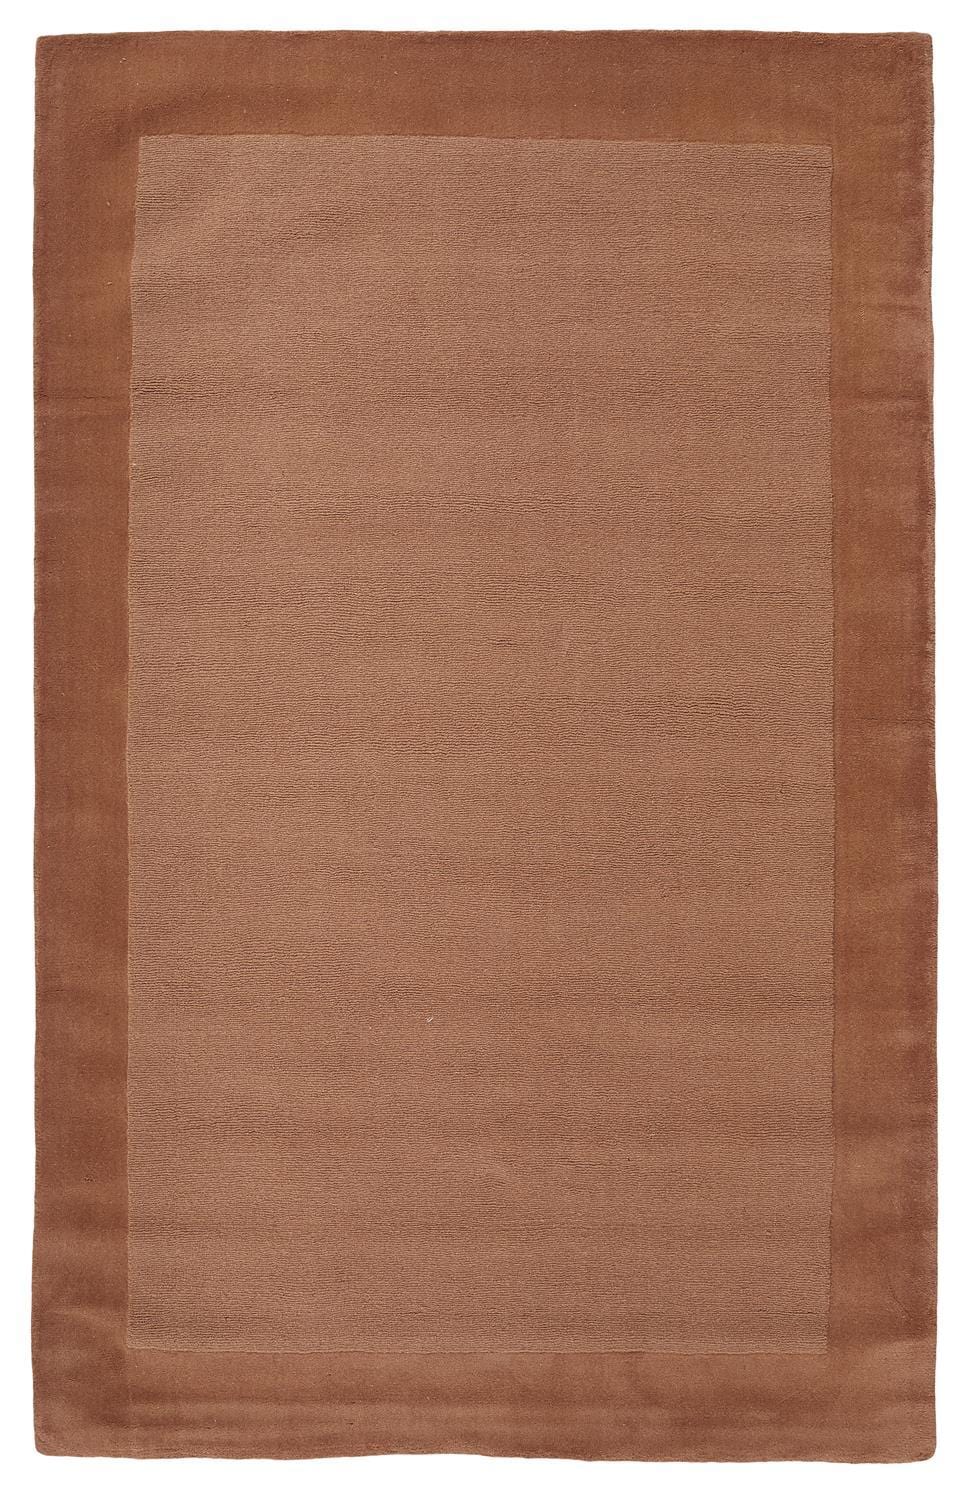 Feizy Feizy Hilson Eco-Friendly Handmade Wool Rug - Rust & Dark Orange - Available in 4 Sizes